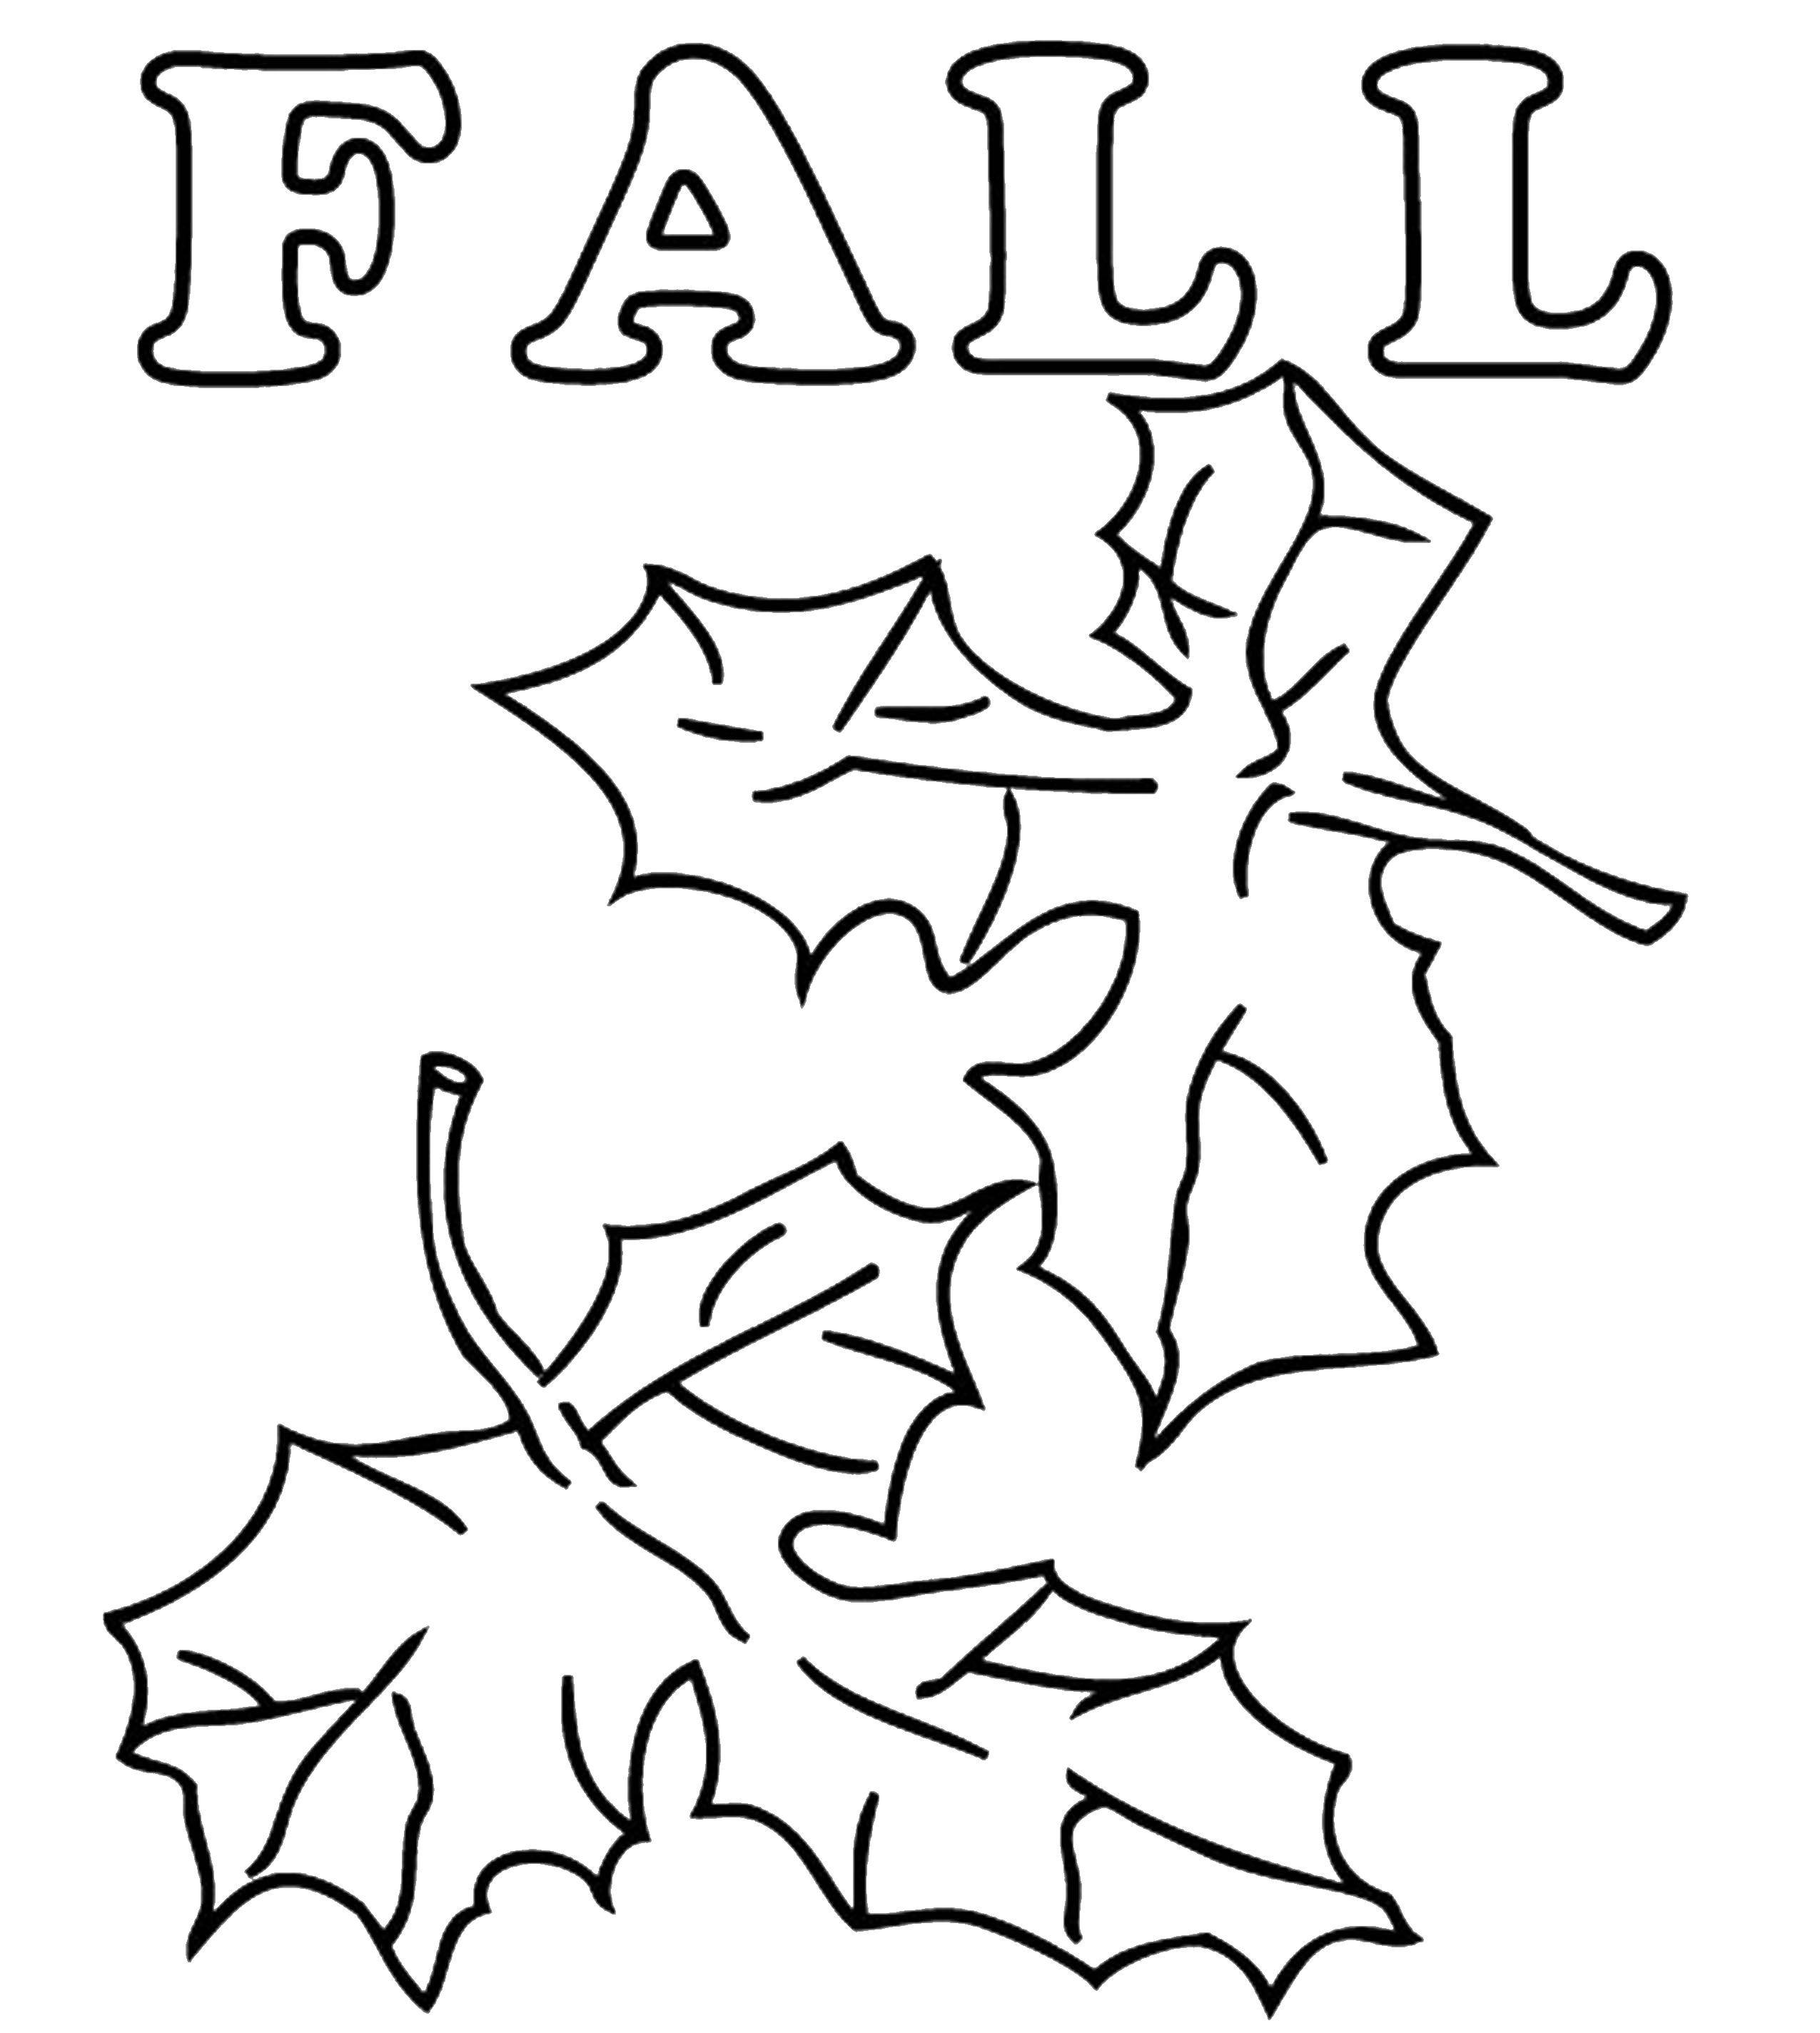 Coloring Falling leaves. Category leaves. Tags:  leaves, leaf, tree.